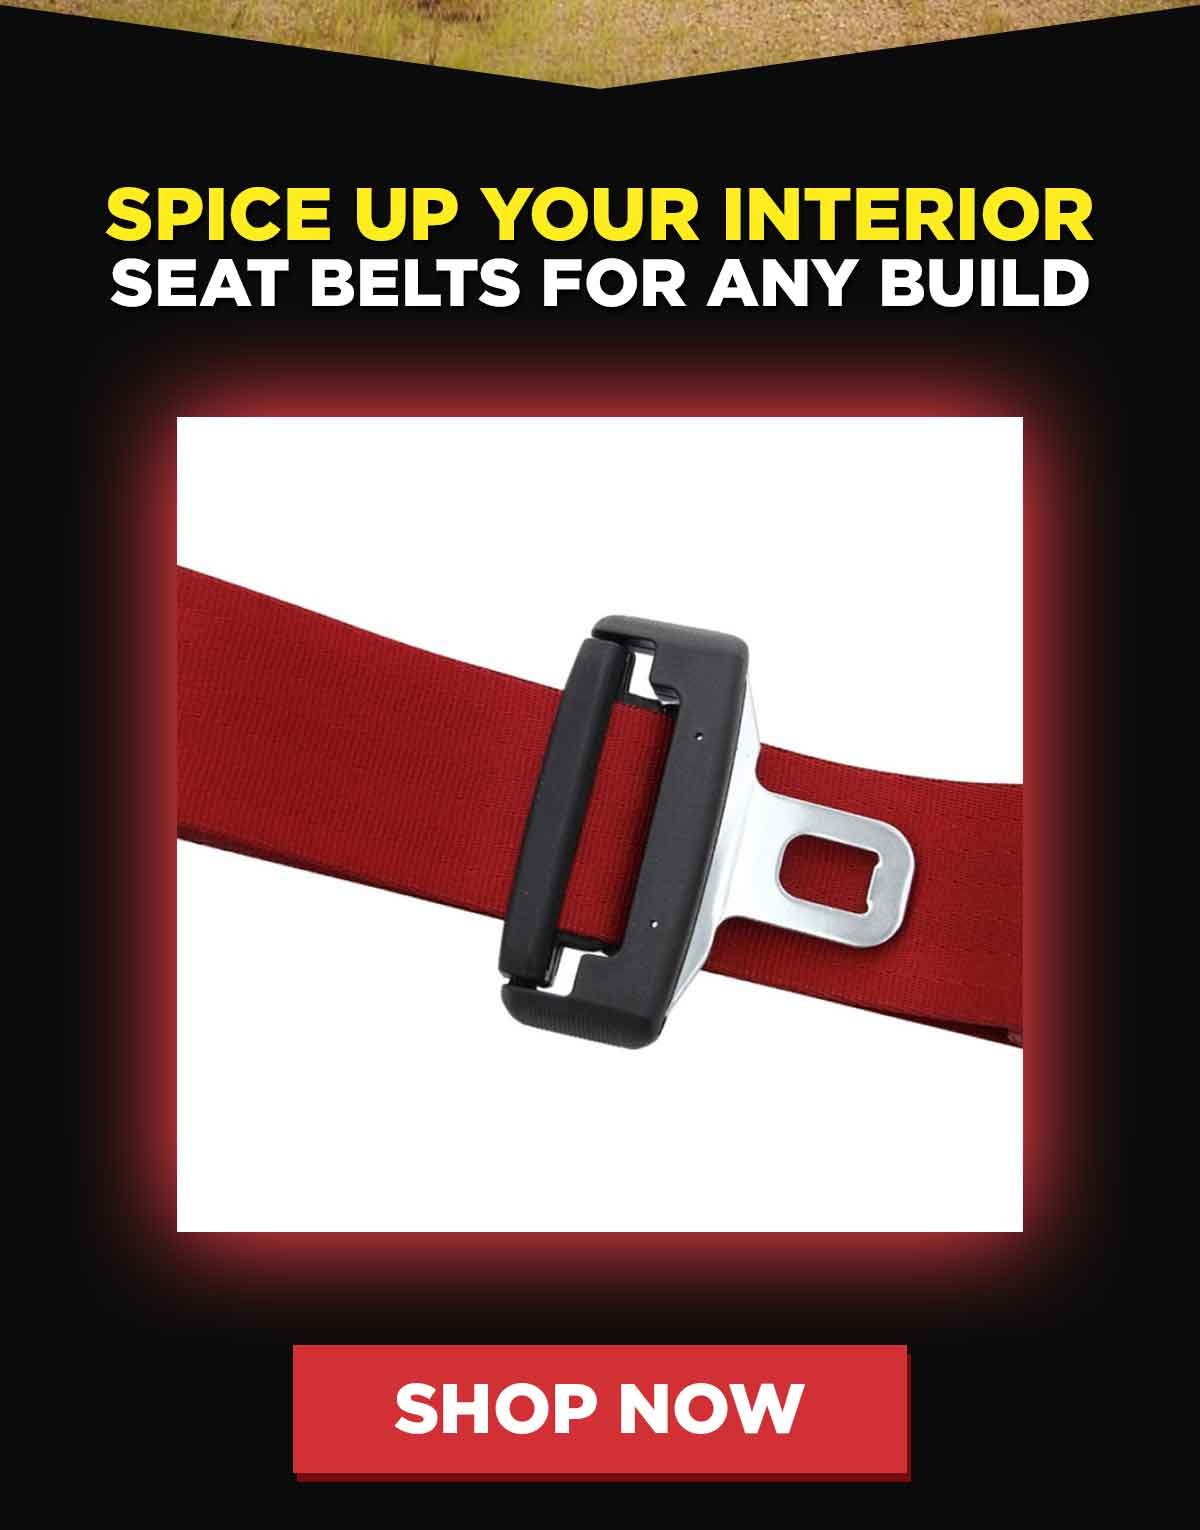 Spice Up Your Interior. Seat Belts for Any Build